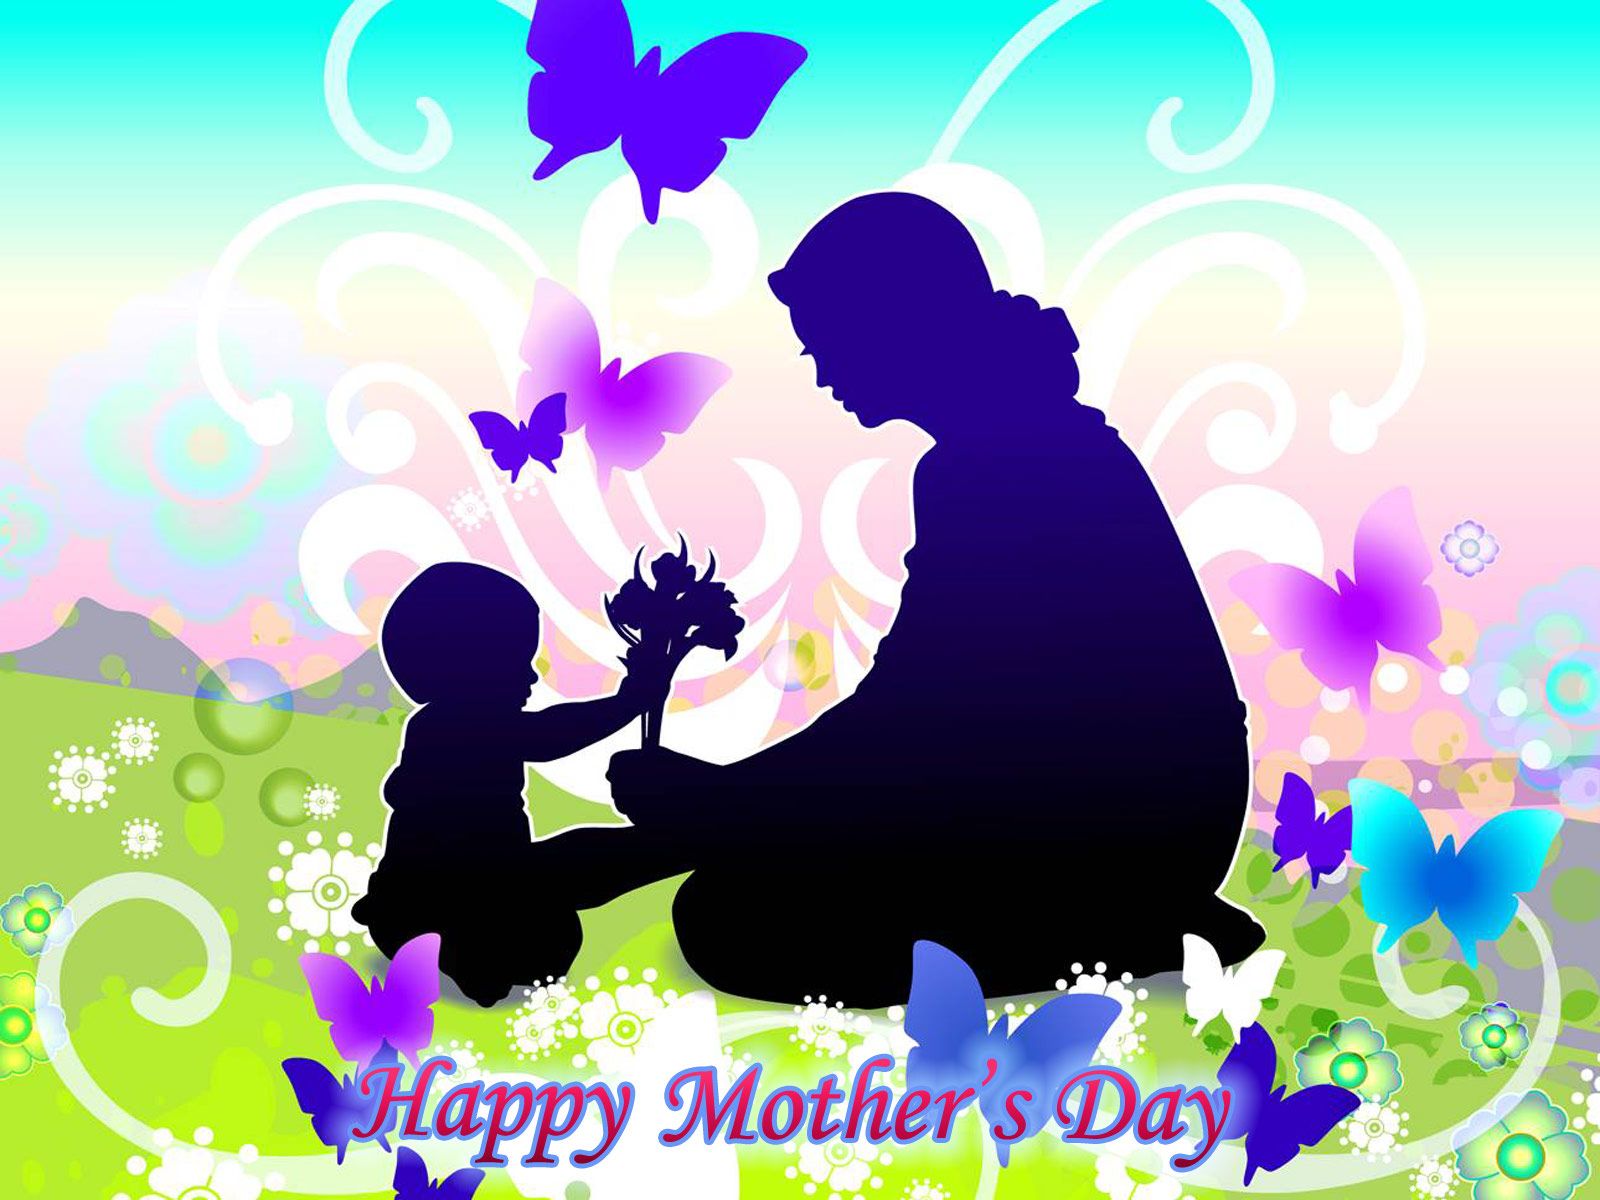 Mother's Day Wallpaper, Cool Mother's Day Wallpaper, 1600x